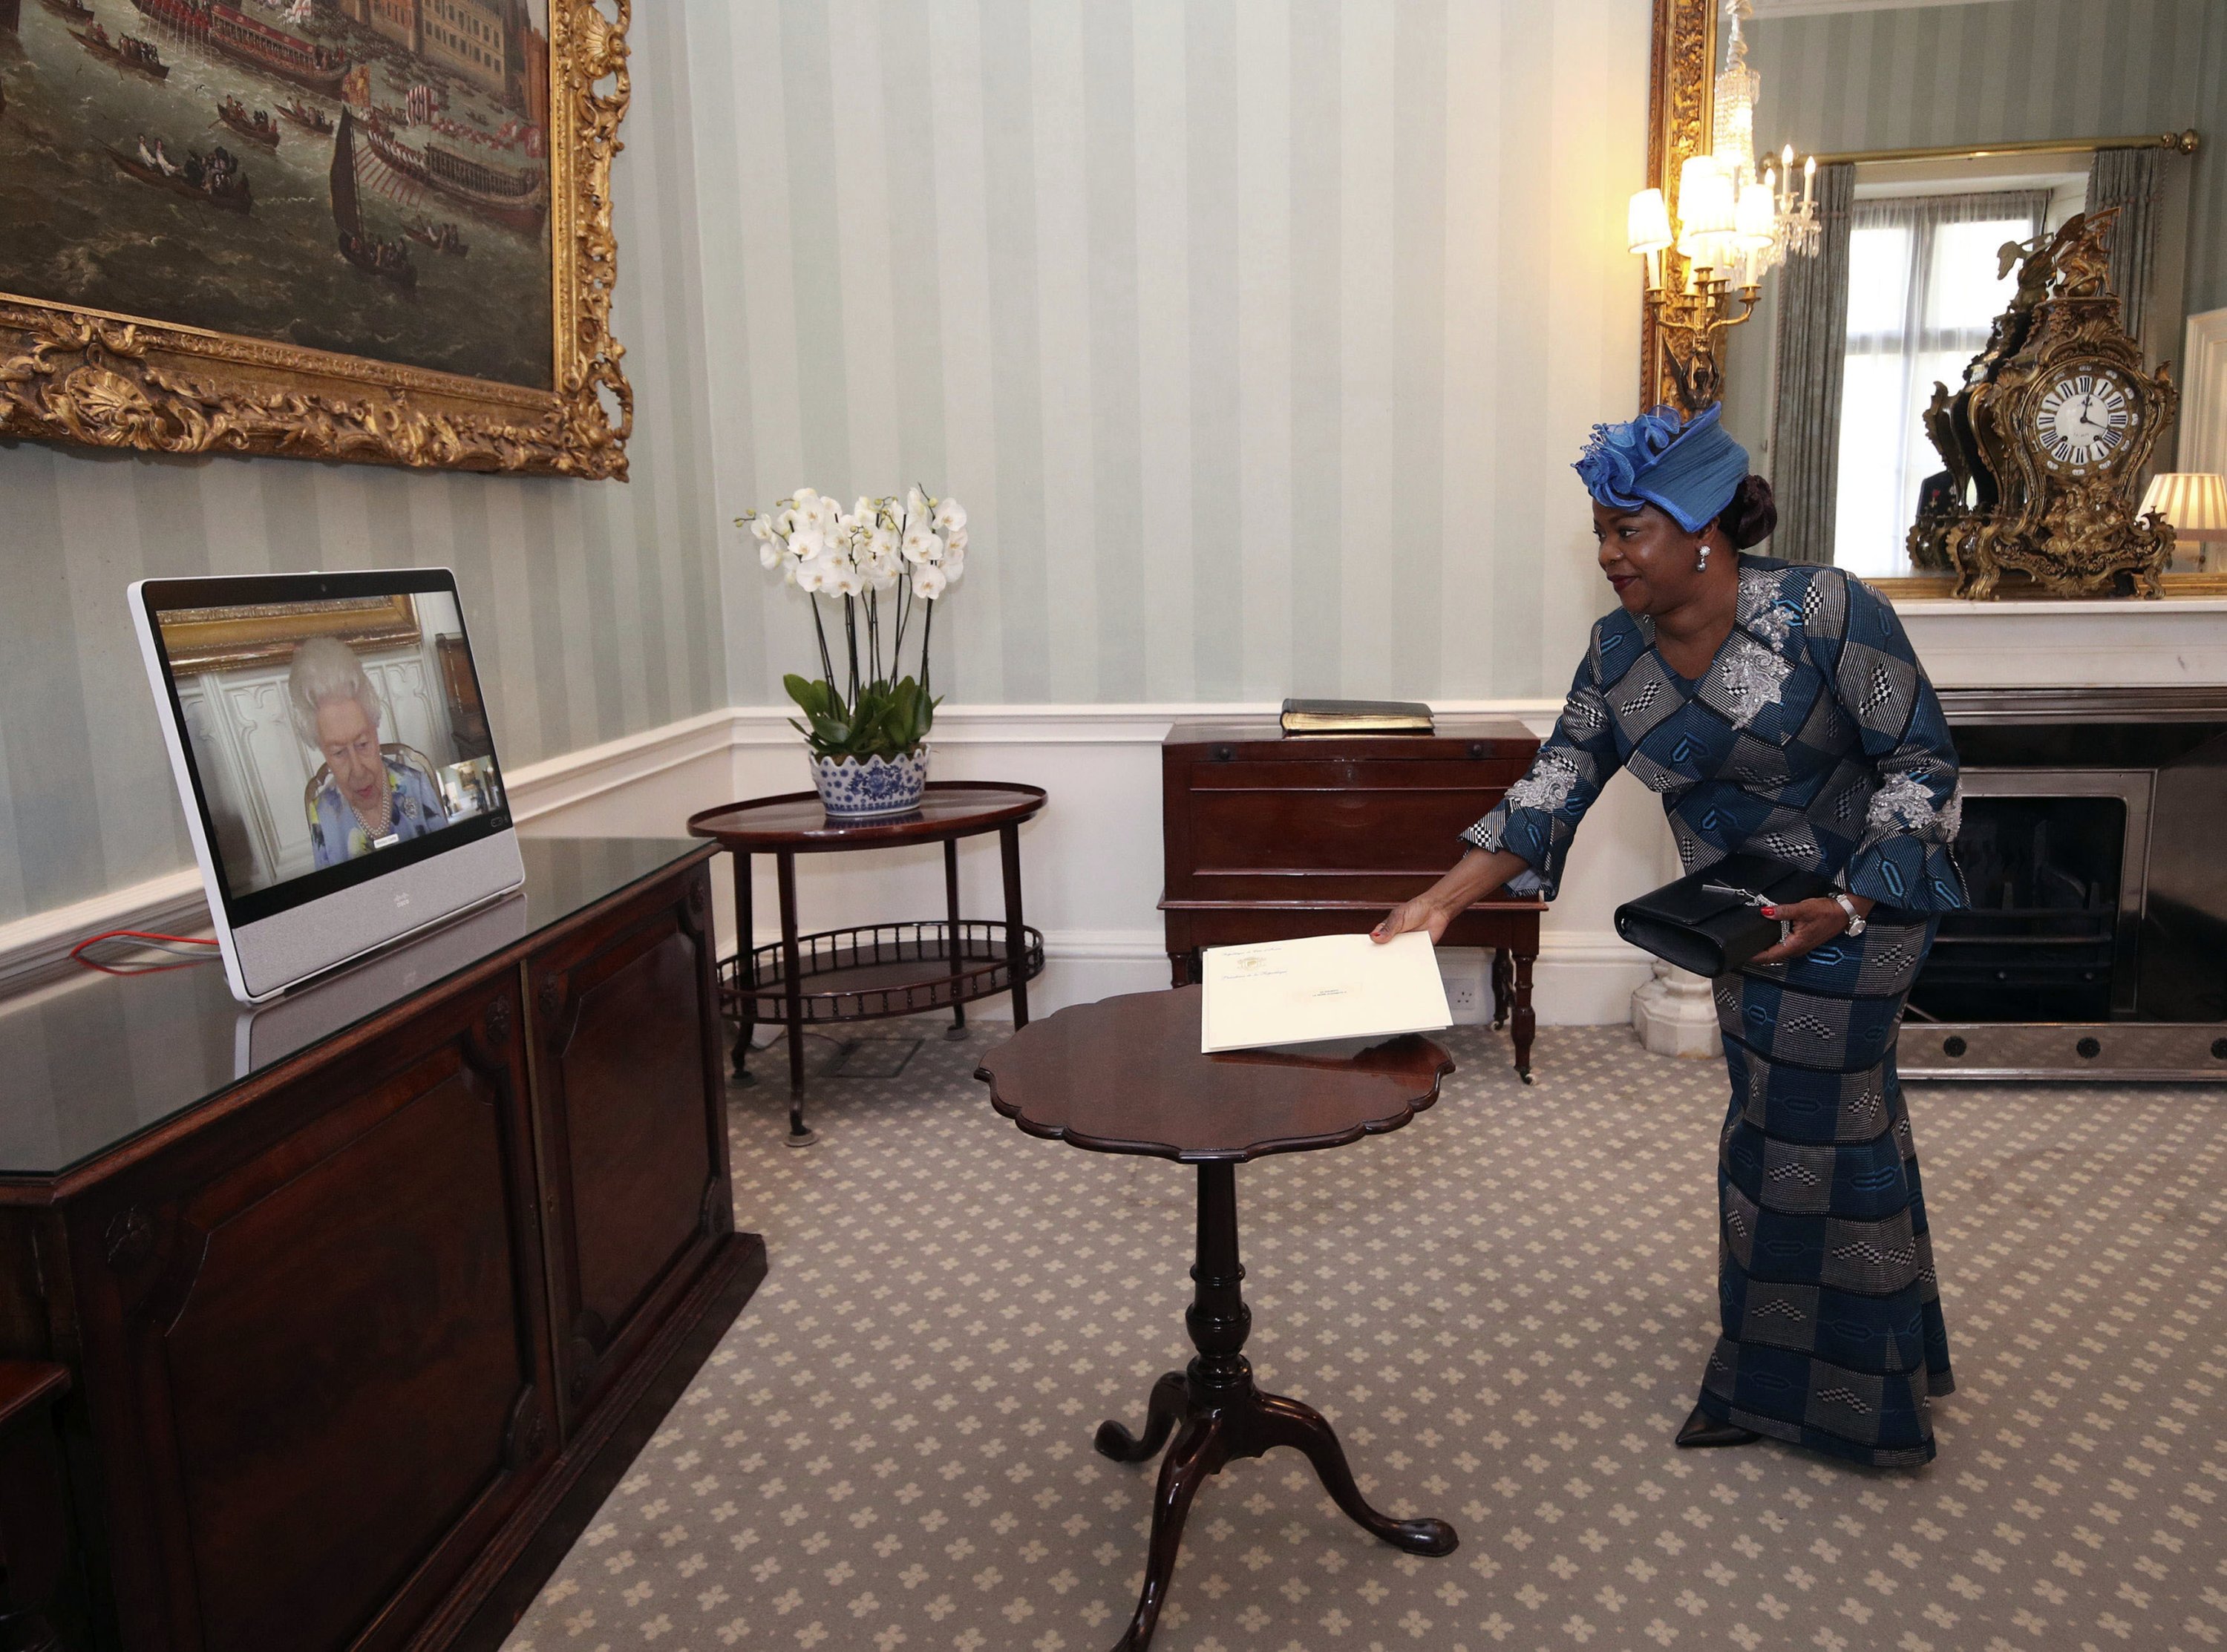 Britain's Queen Elizabeth II appears on a screen by videolink from Windsor Castle, during a virtual audience to receive Her Excellency Sara Affoue Amani, the Ambassador of Cote d'Ivoire, at Buckingham Palace, London, U.K., April 27, 2021. (AP Photo)